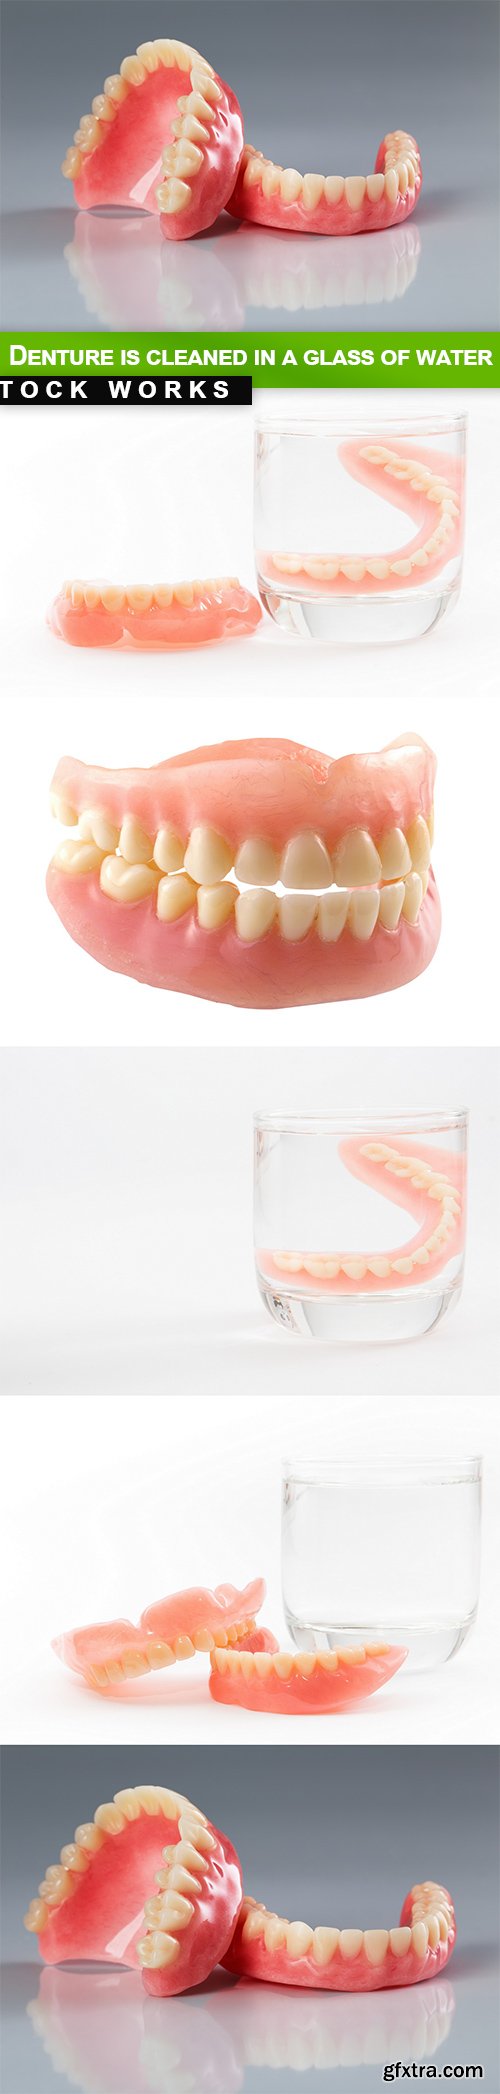 Denture is cleaned in a glass of water - 5 UHQ JPEG